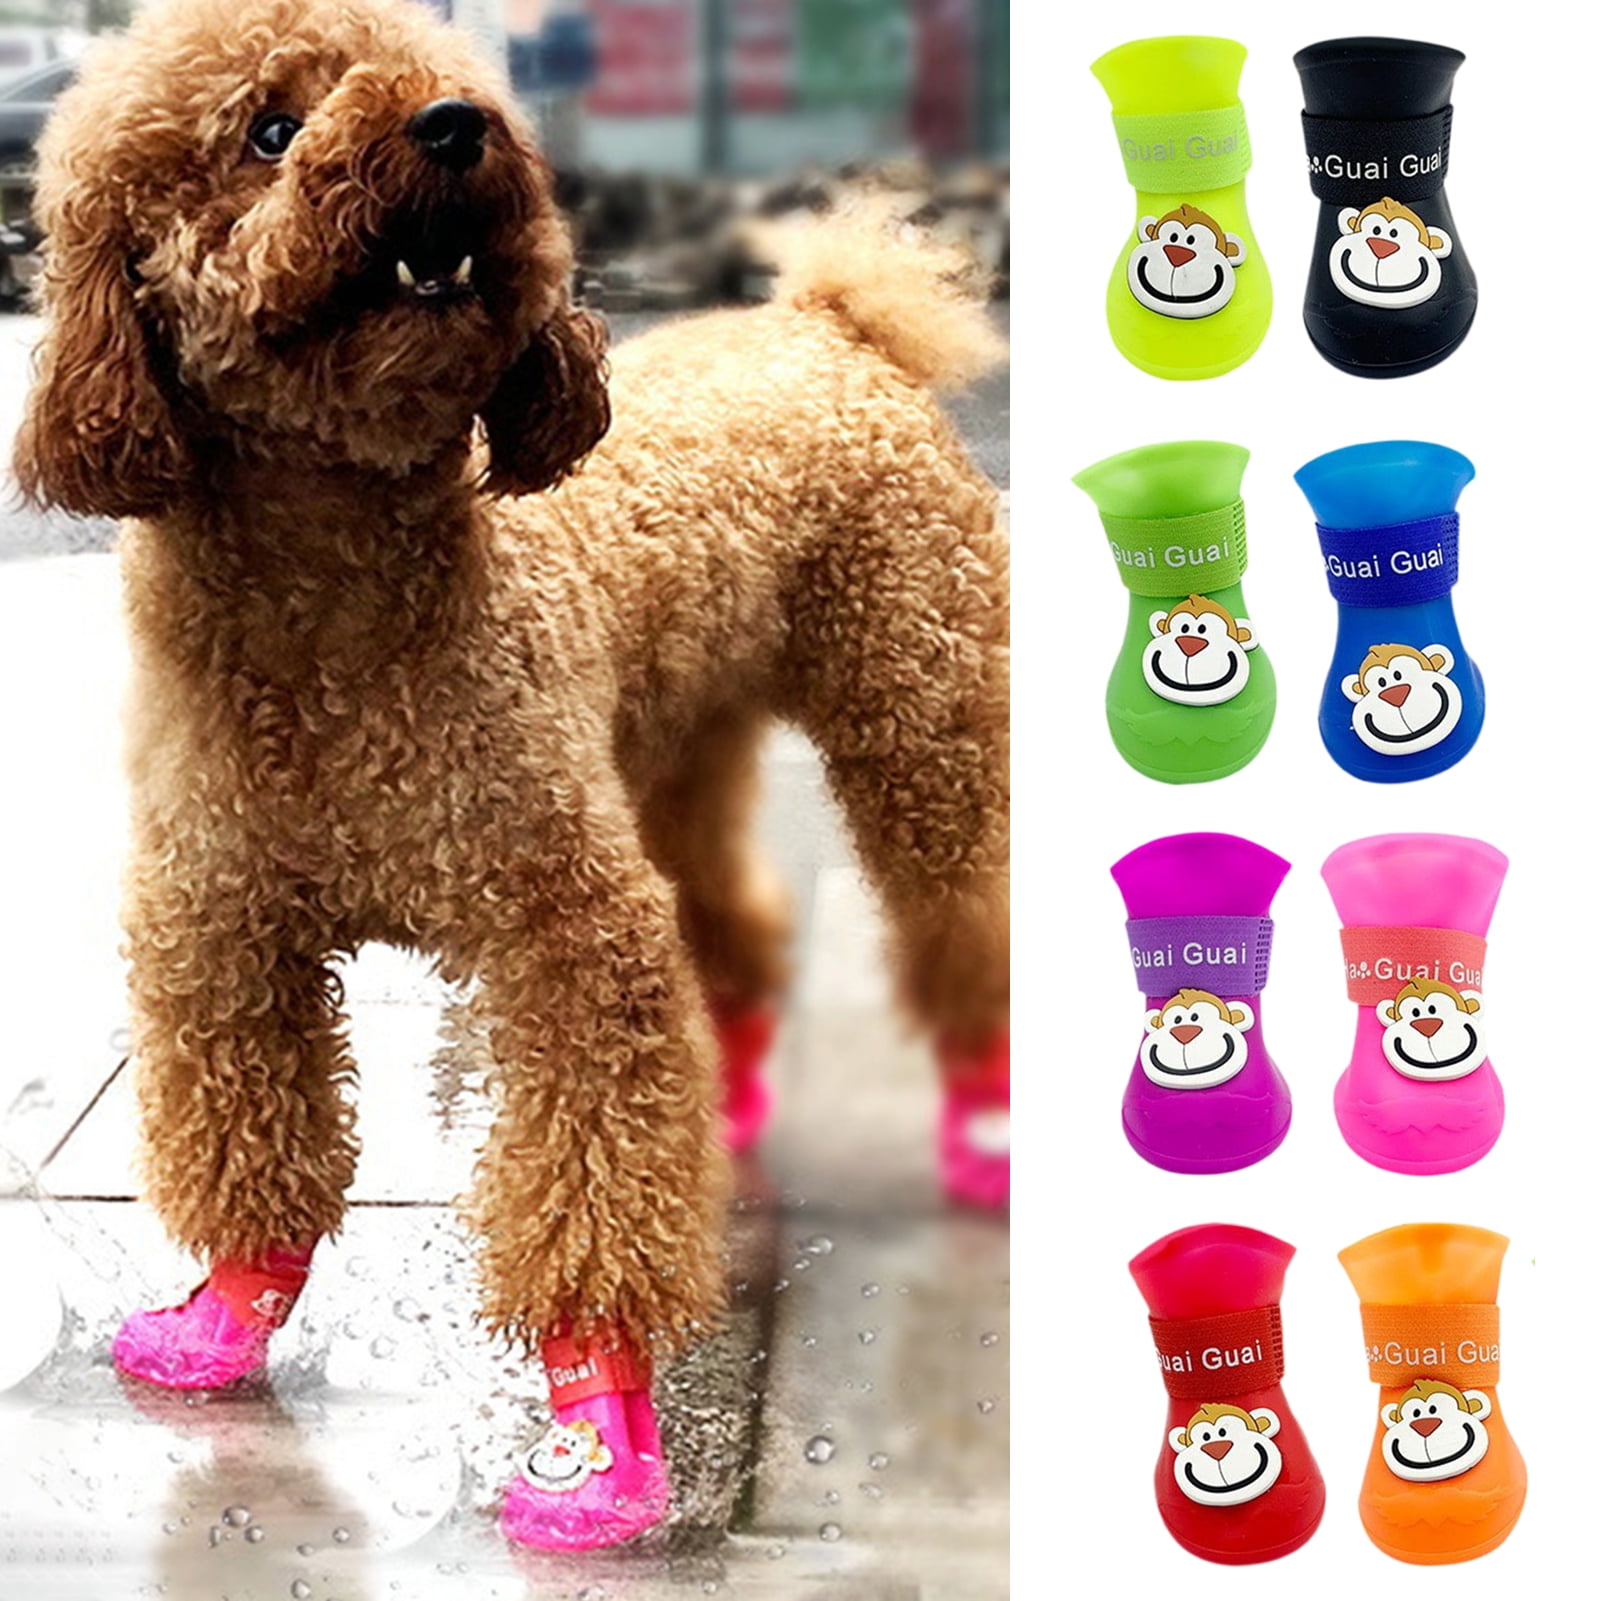 Dog Shoes / Pet Shoes / All Season Shoes / Waterproof Outdoor 